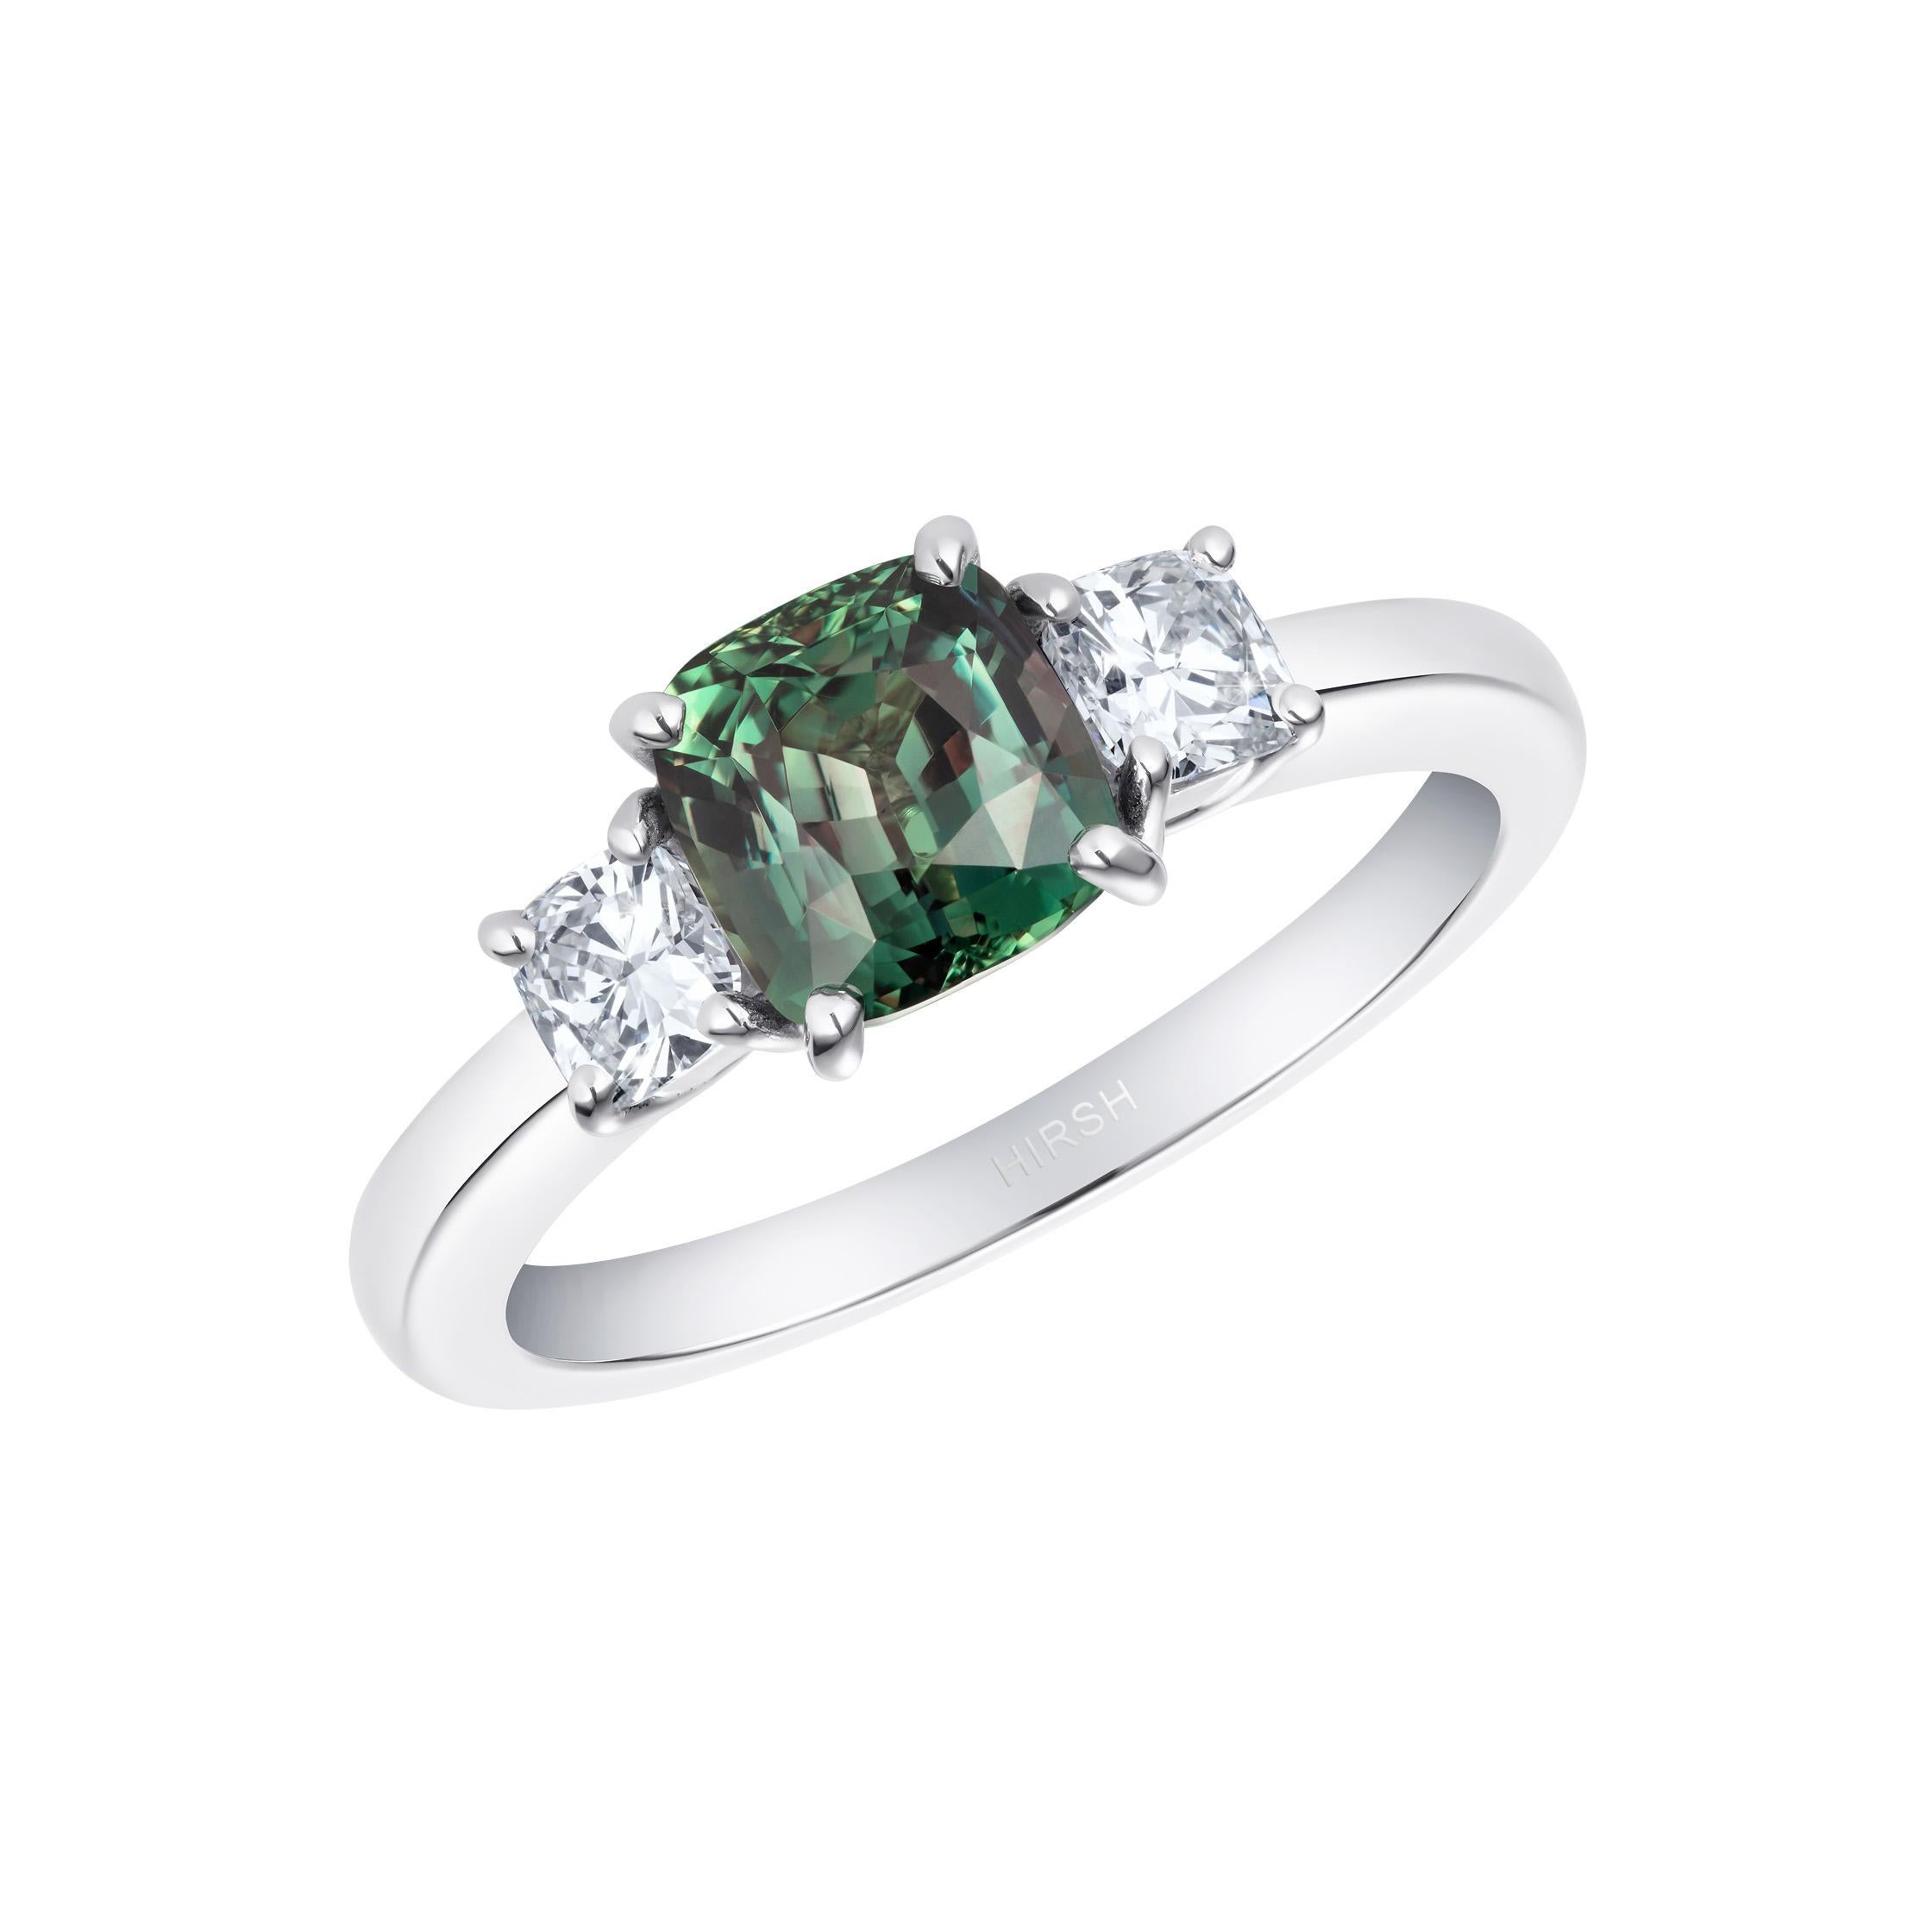 A stunning cushion cut natural colour-change Alexandrite is set in the Hirsh Trilogy setting amongst perfectly matched diamond side stones.

This beautiful gem appears green in daylight and a lovely reddish purple in incandescent light.

- 1.53